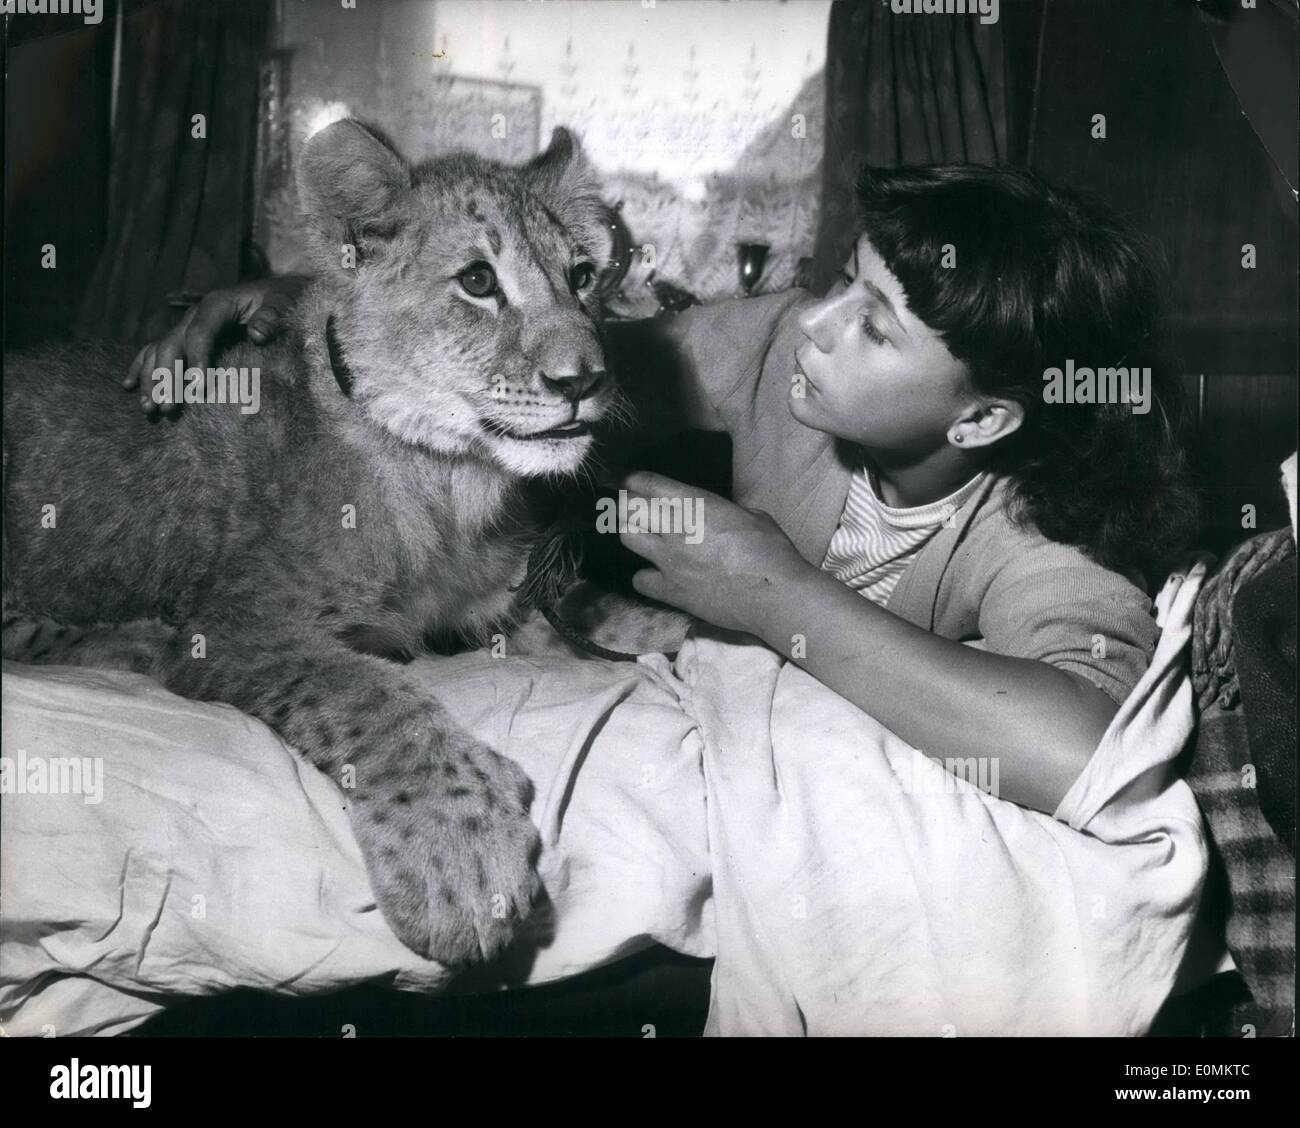 Oct. 10, 1955 - No Pussy Cat For Amelia - She Prefers A Lion: No home is  complete without a cat around the house, but when the house is a caravan and